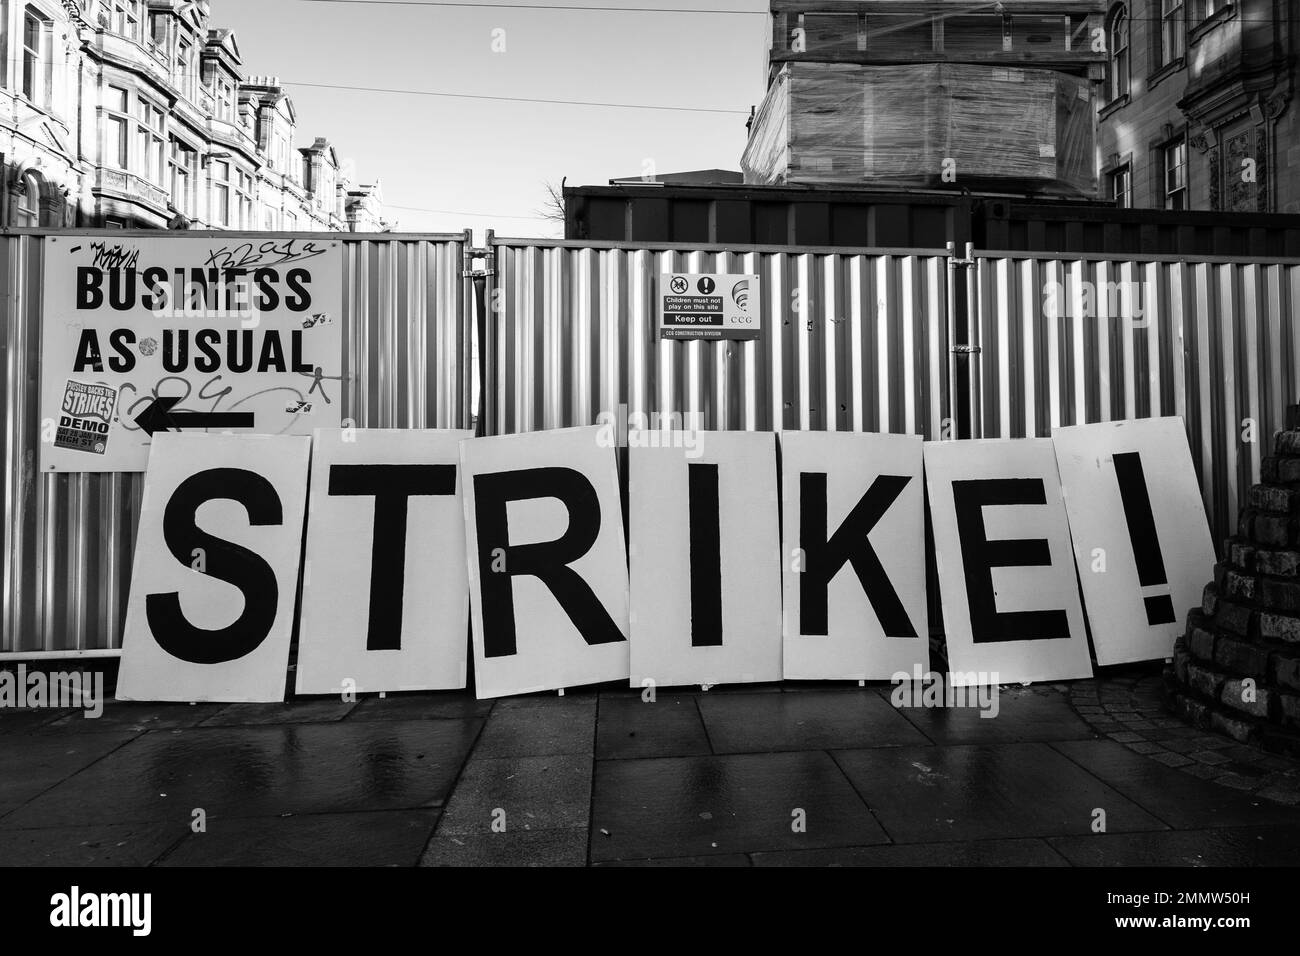 A Strike placard next to a Business As Usual sign Stock Photo